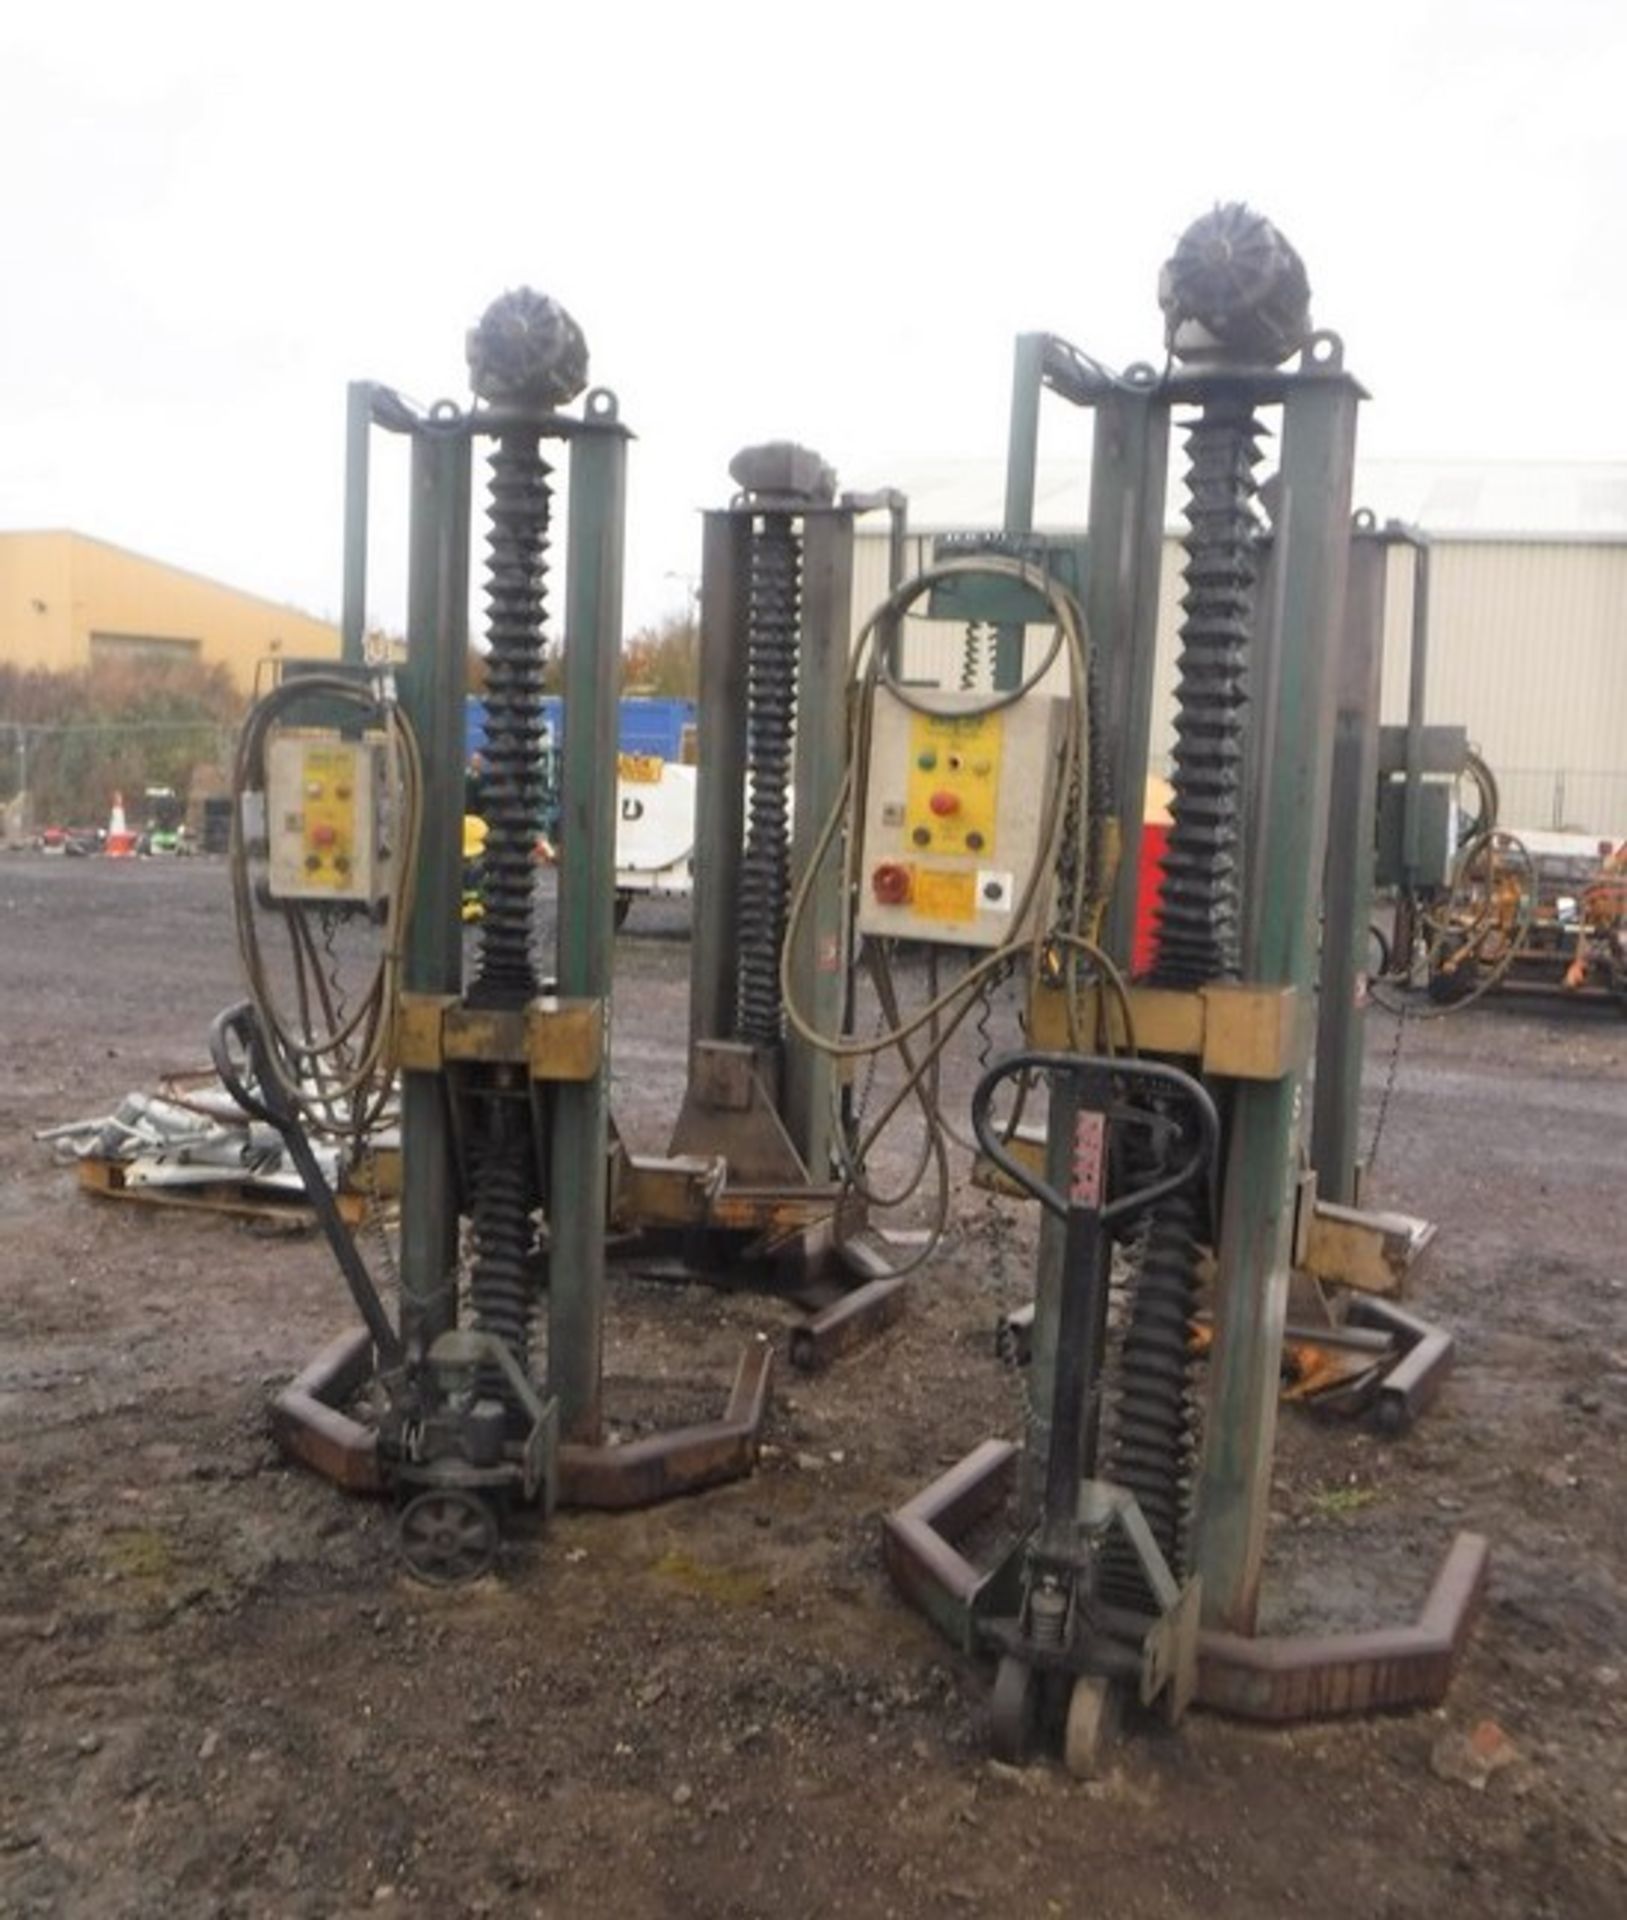 PROLIFT II 3 phase heavy good lifts. These lifts were used for the maintenance for single & double c - Image 2 of 5